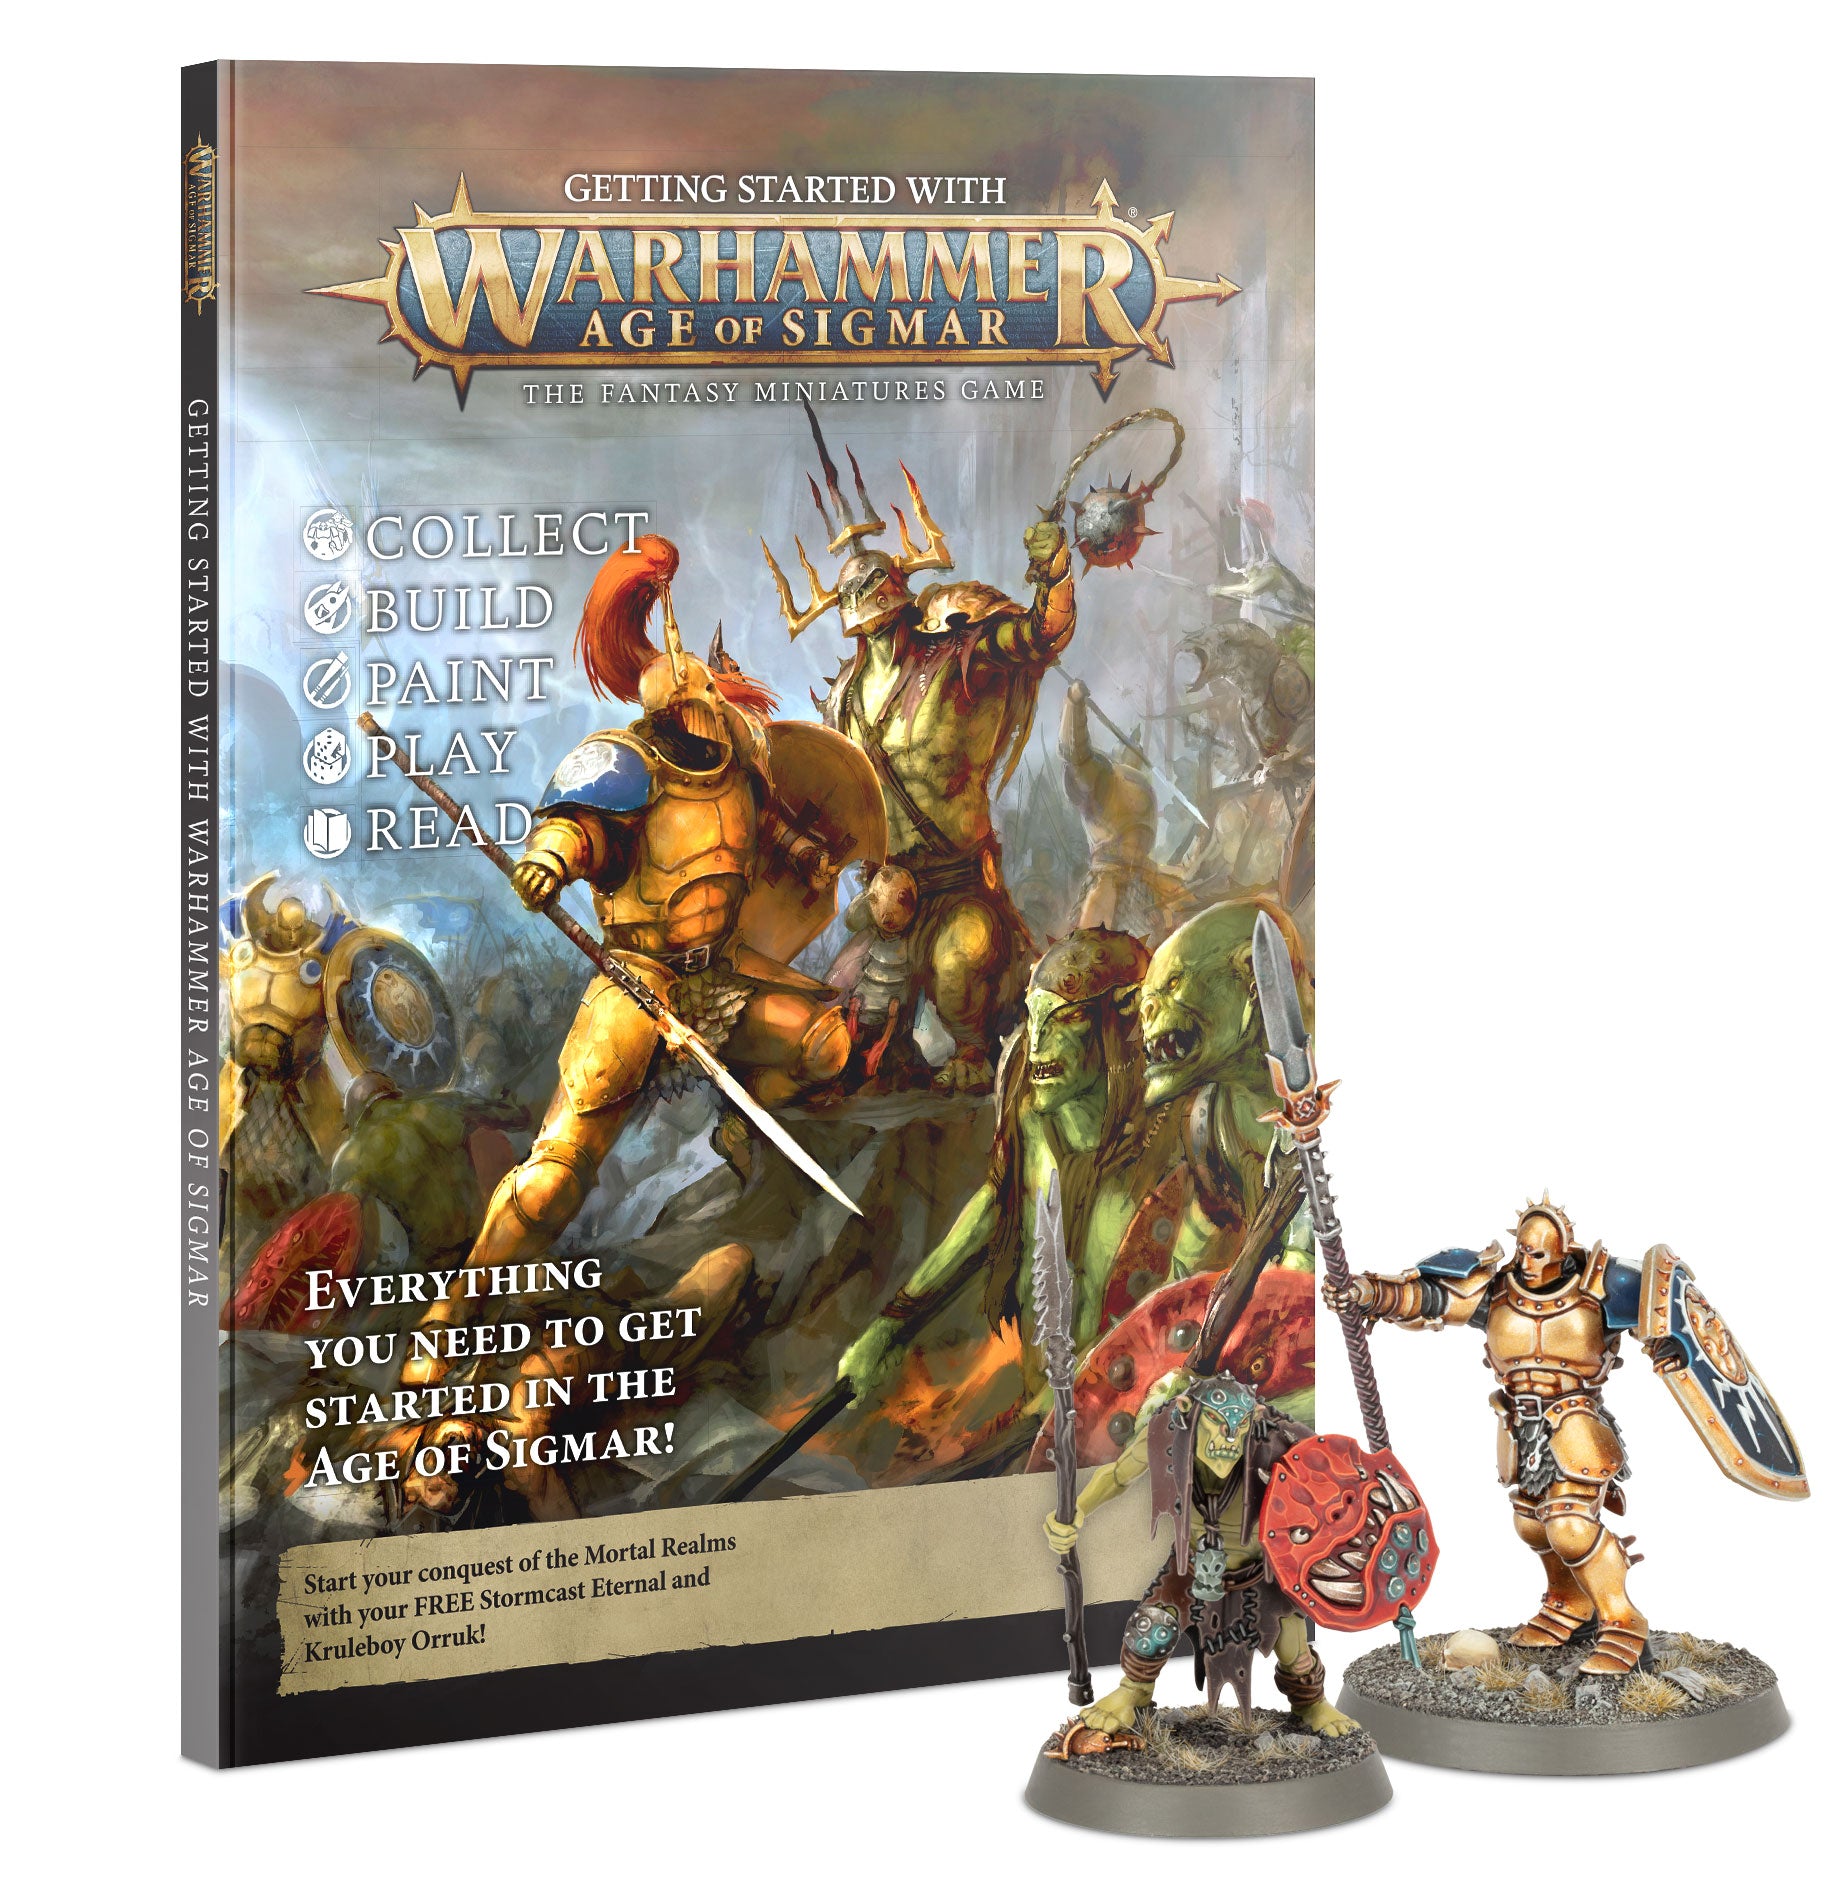 Getting Started with Warhammer Age of Sigmar - Bards & Cards